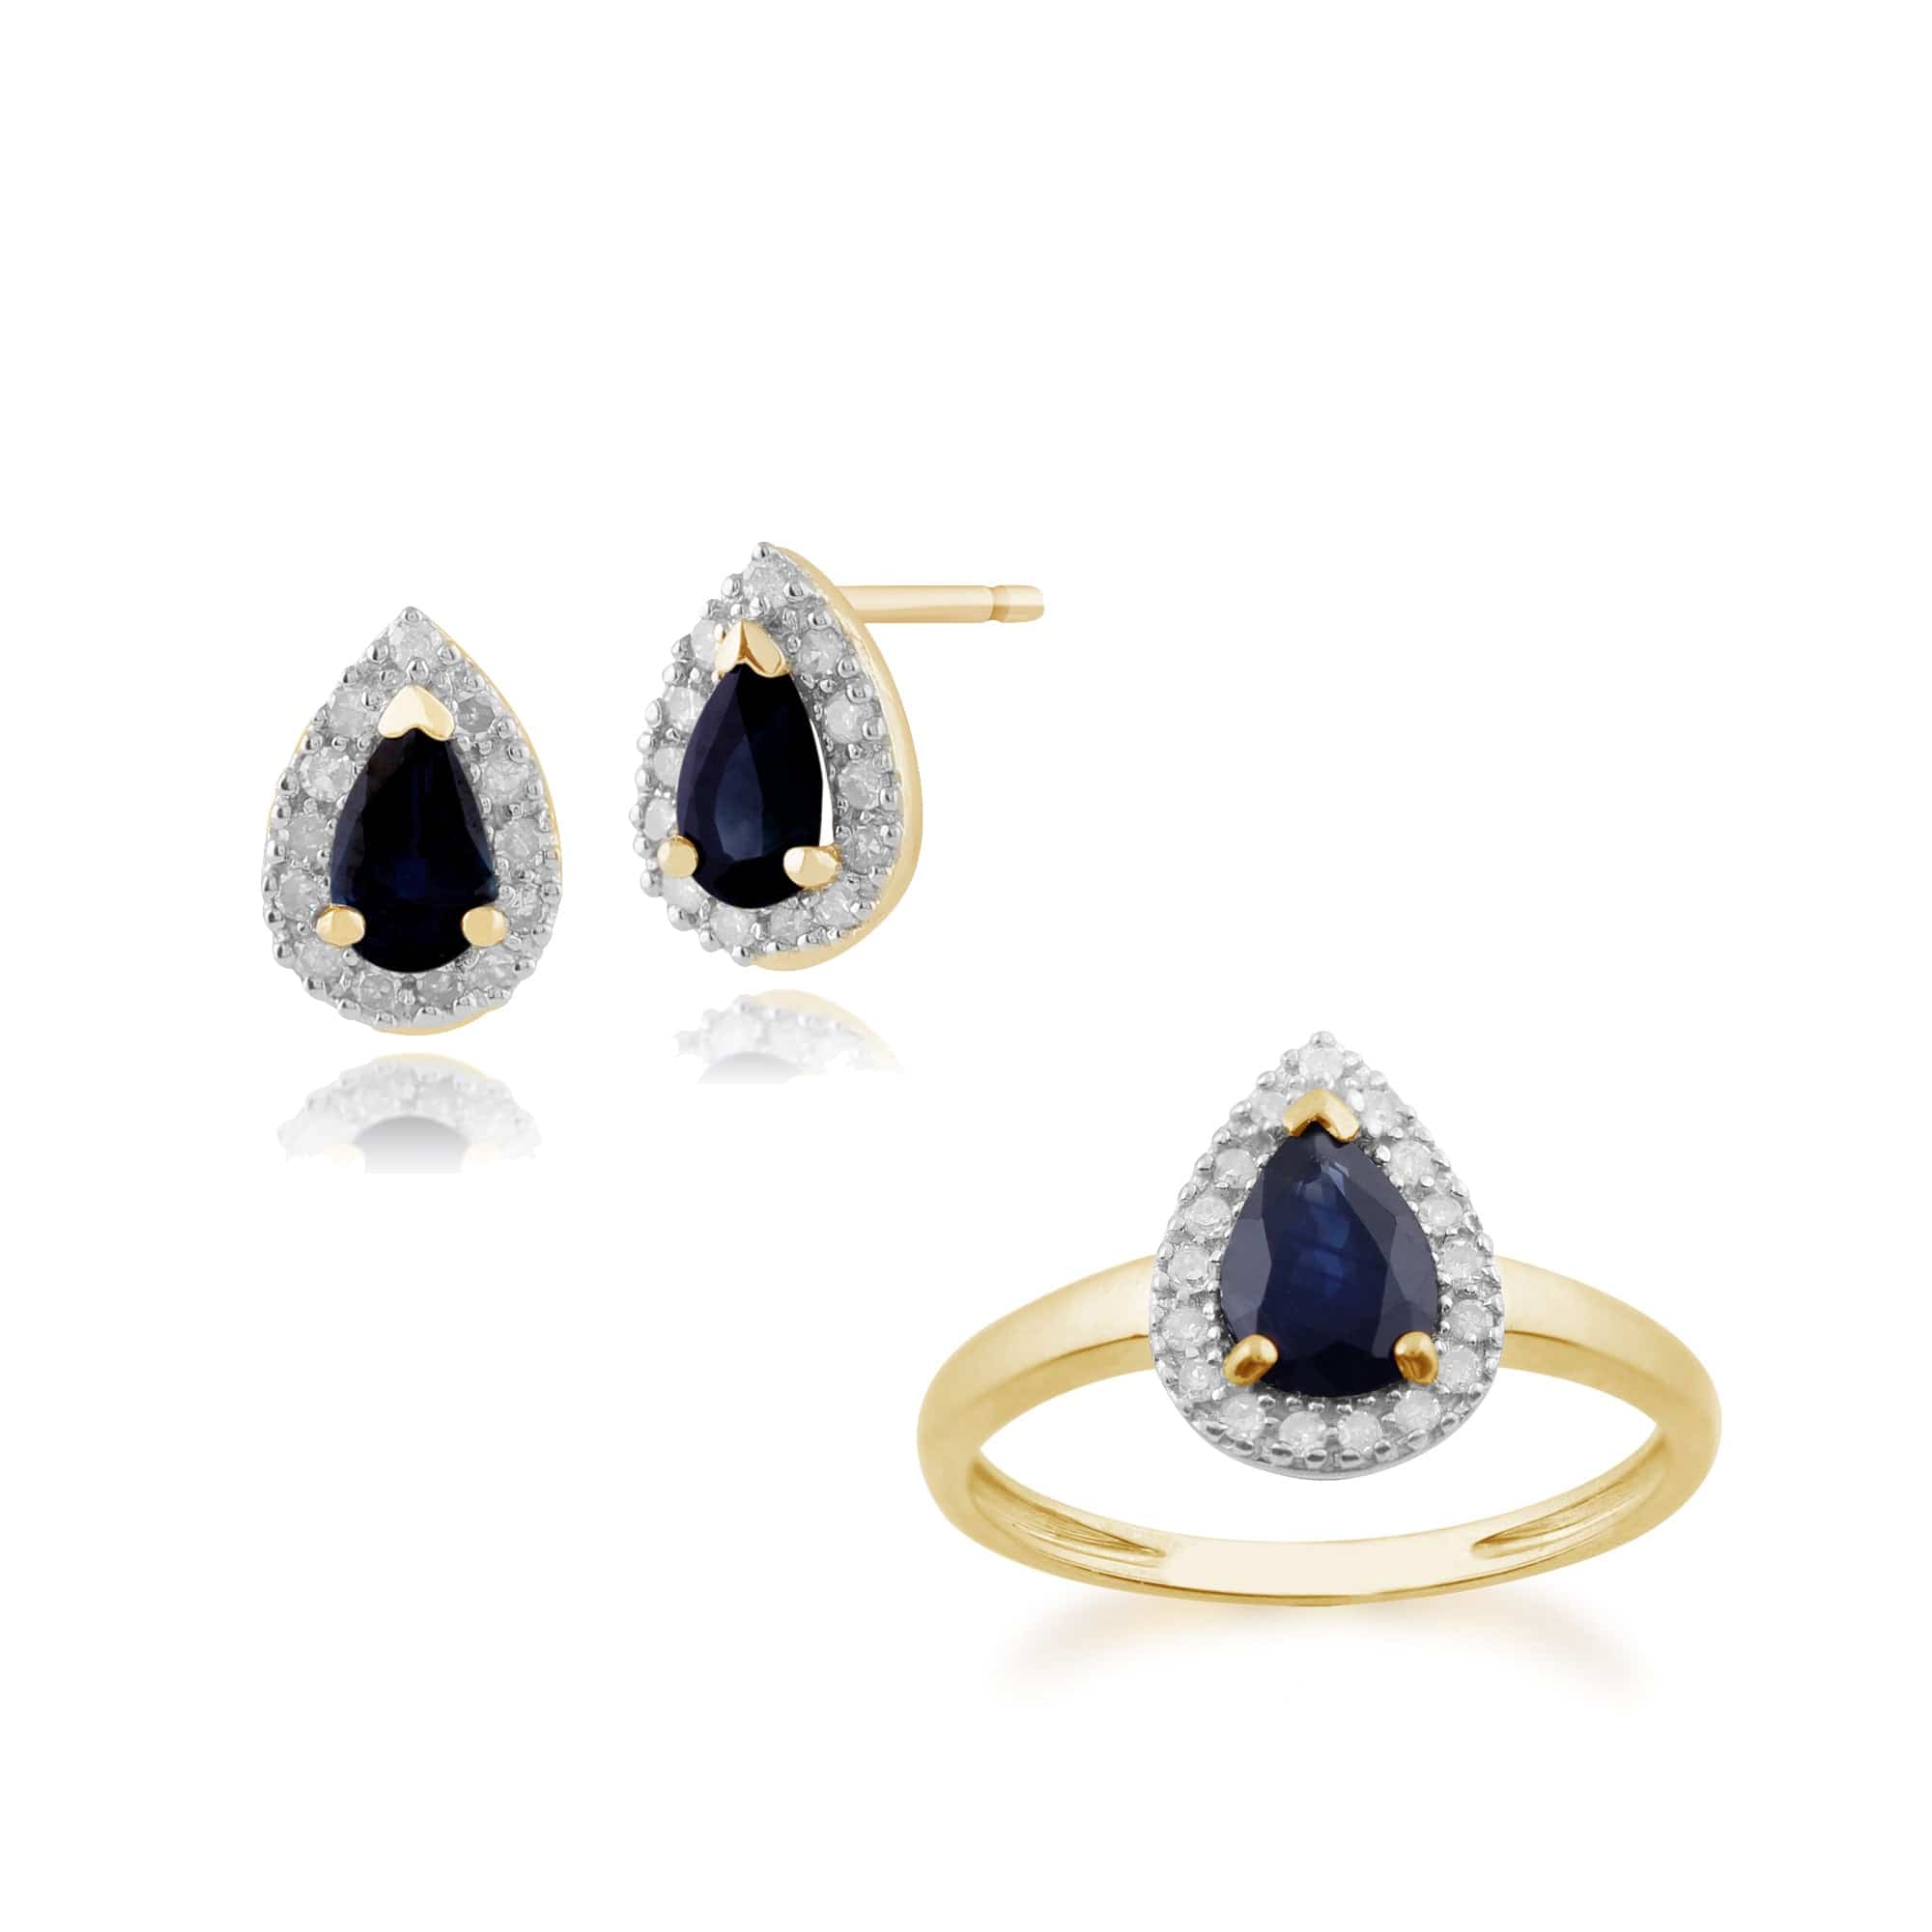 24219-22616 Classic Pear Sapphire & Diamond Halo Stud Earrings & Ring Set in 9ct Yellow Gold 1